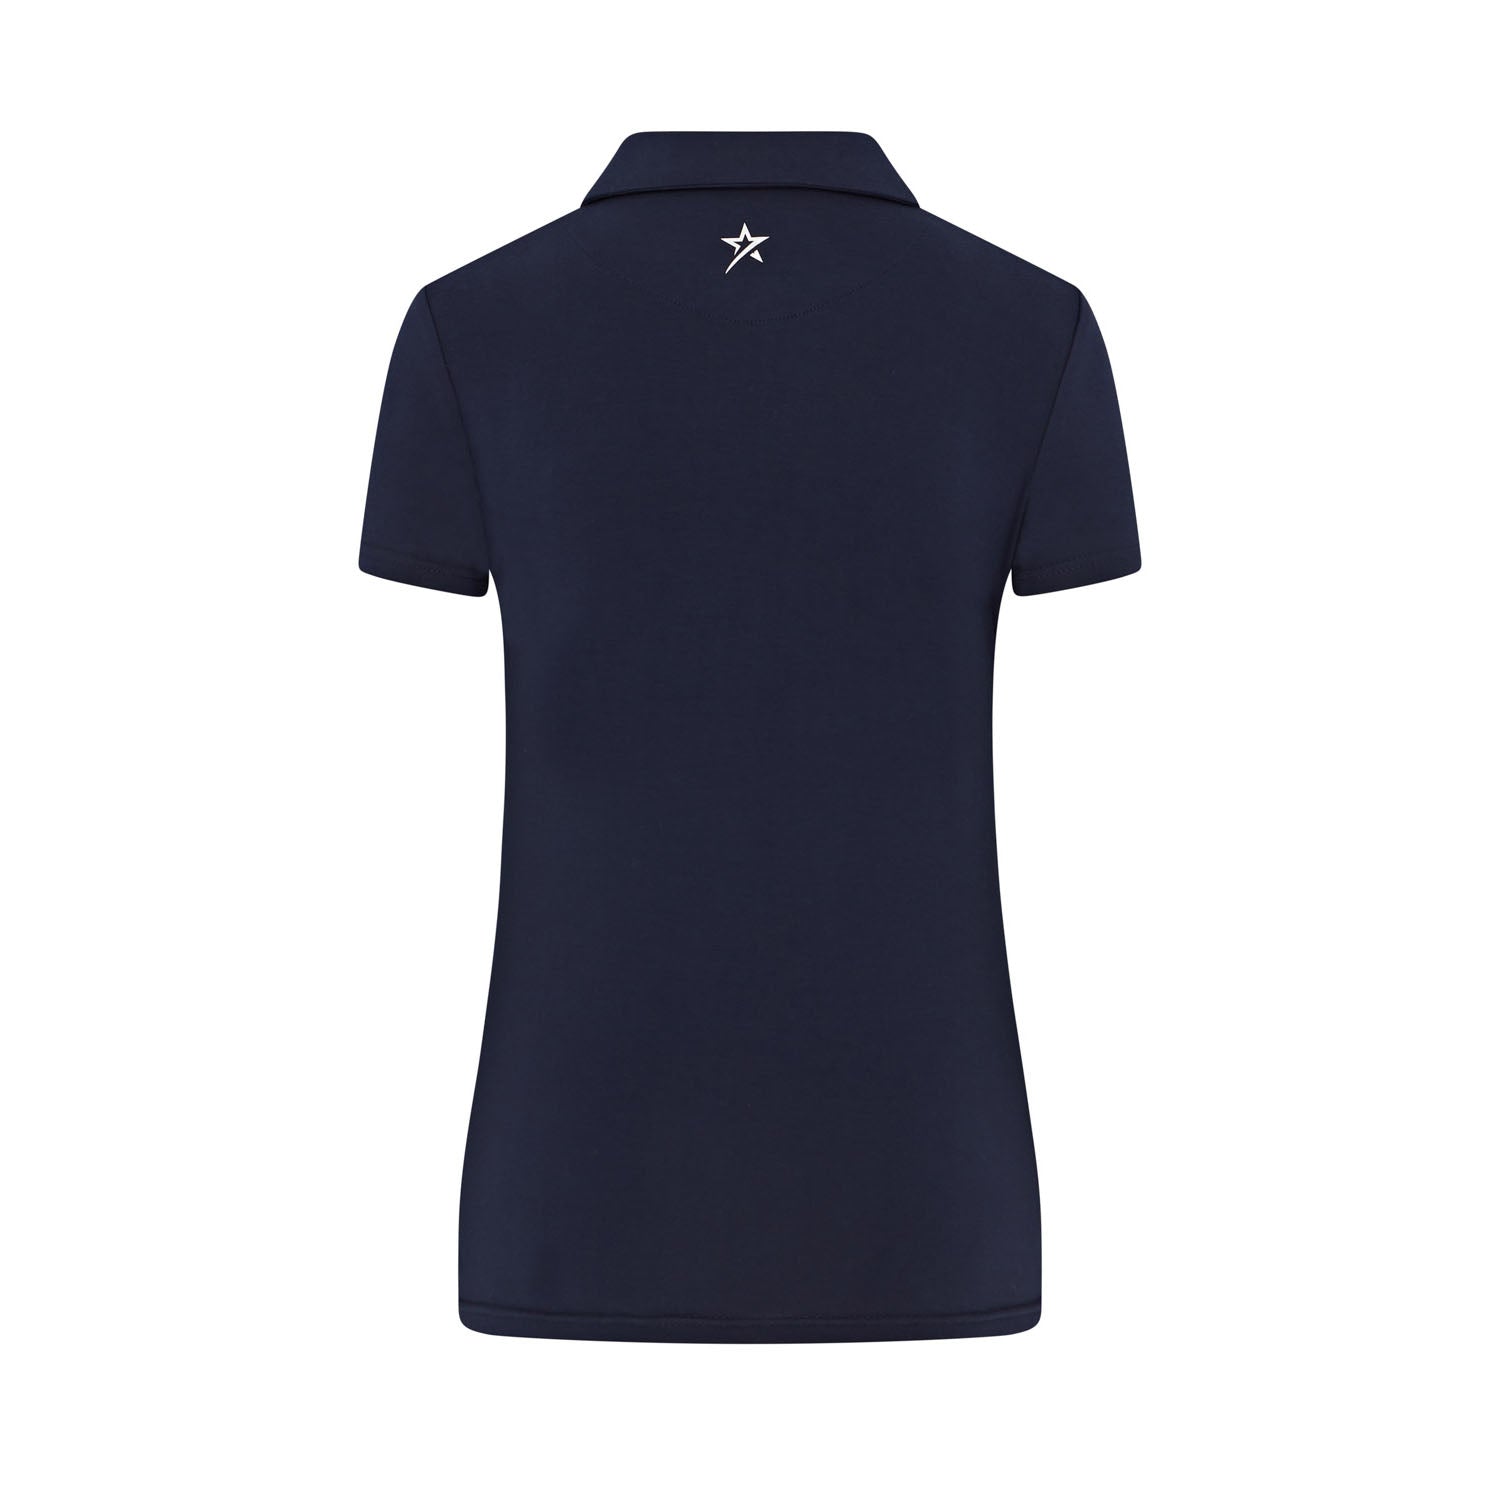 Swing Out Sister Ladies Ultra-Soft Stretch Short Sleeve Polo in Navy Blazer